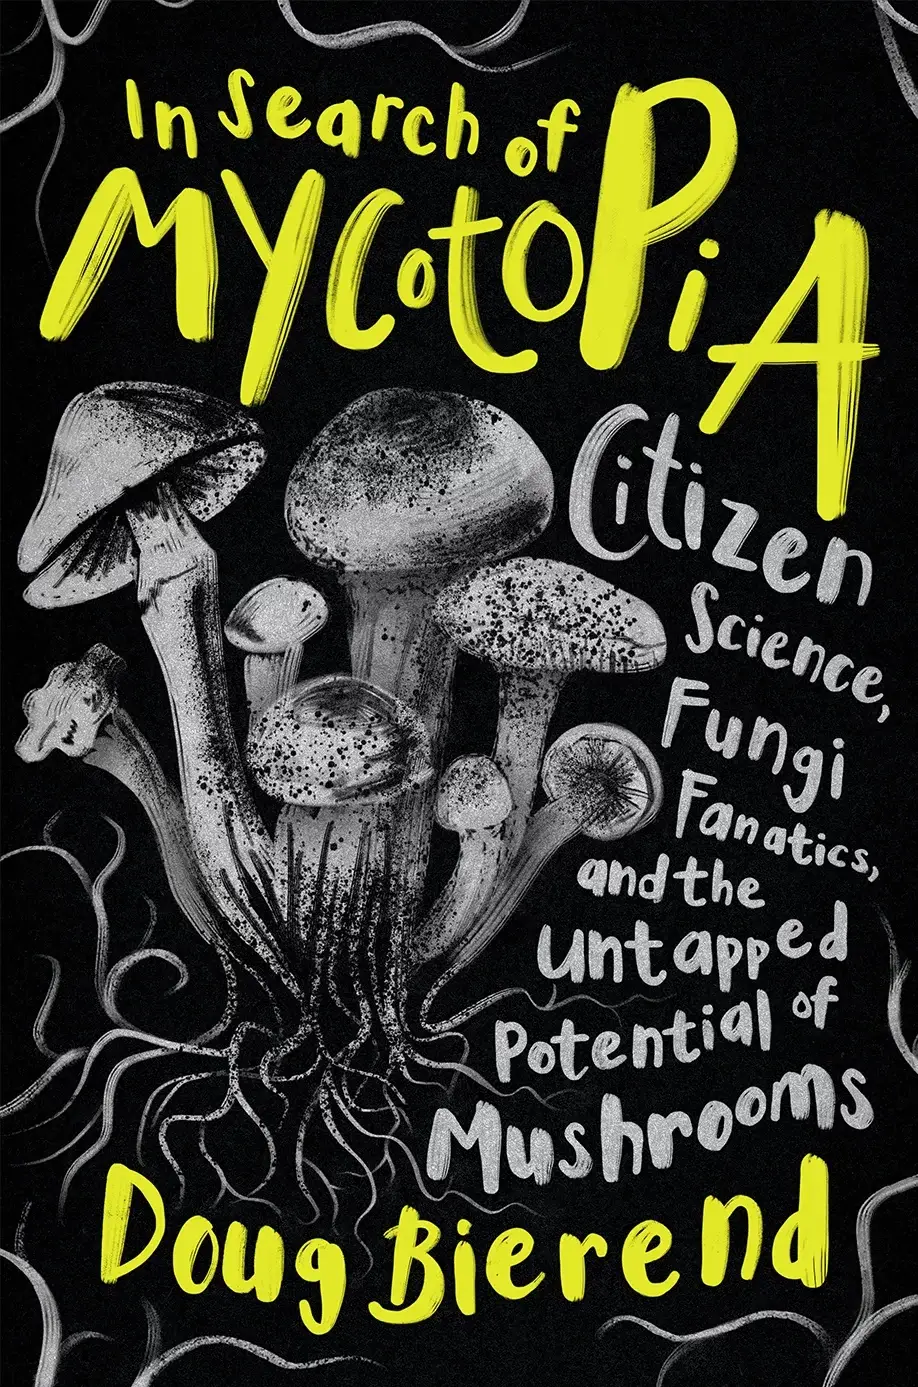 In Search of Mycotopia Citizen Science Fungi Fanatics, and the Untapped Potential of Mushrooms book cover